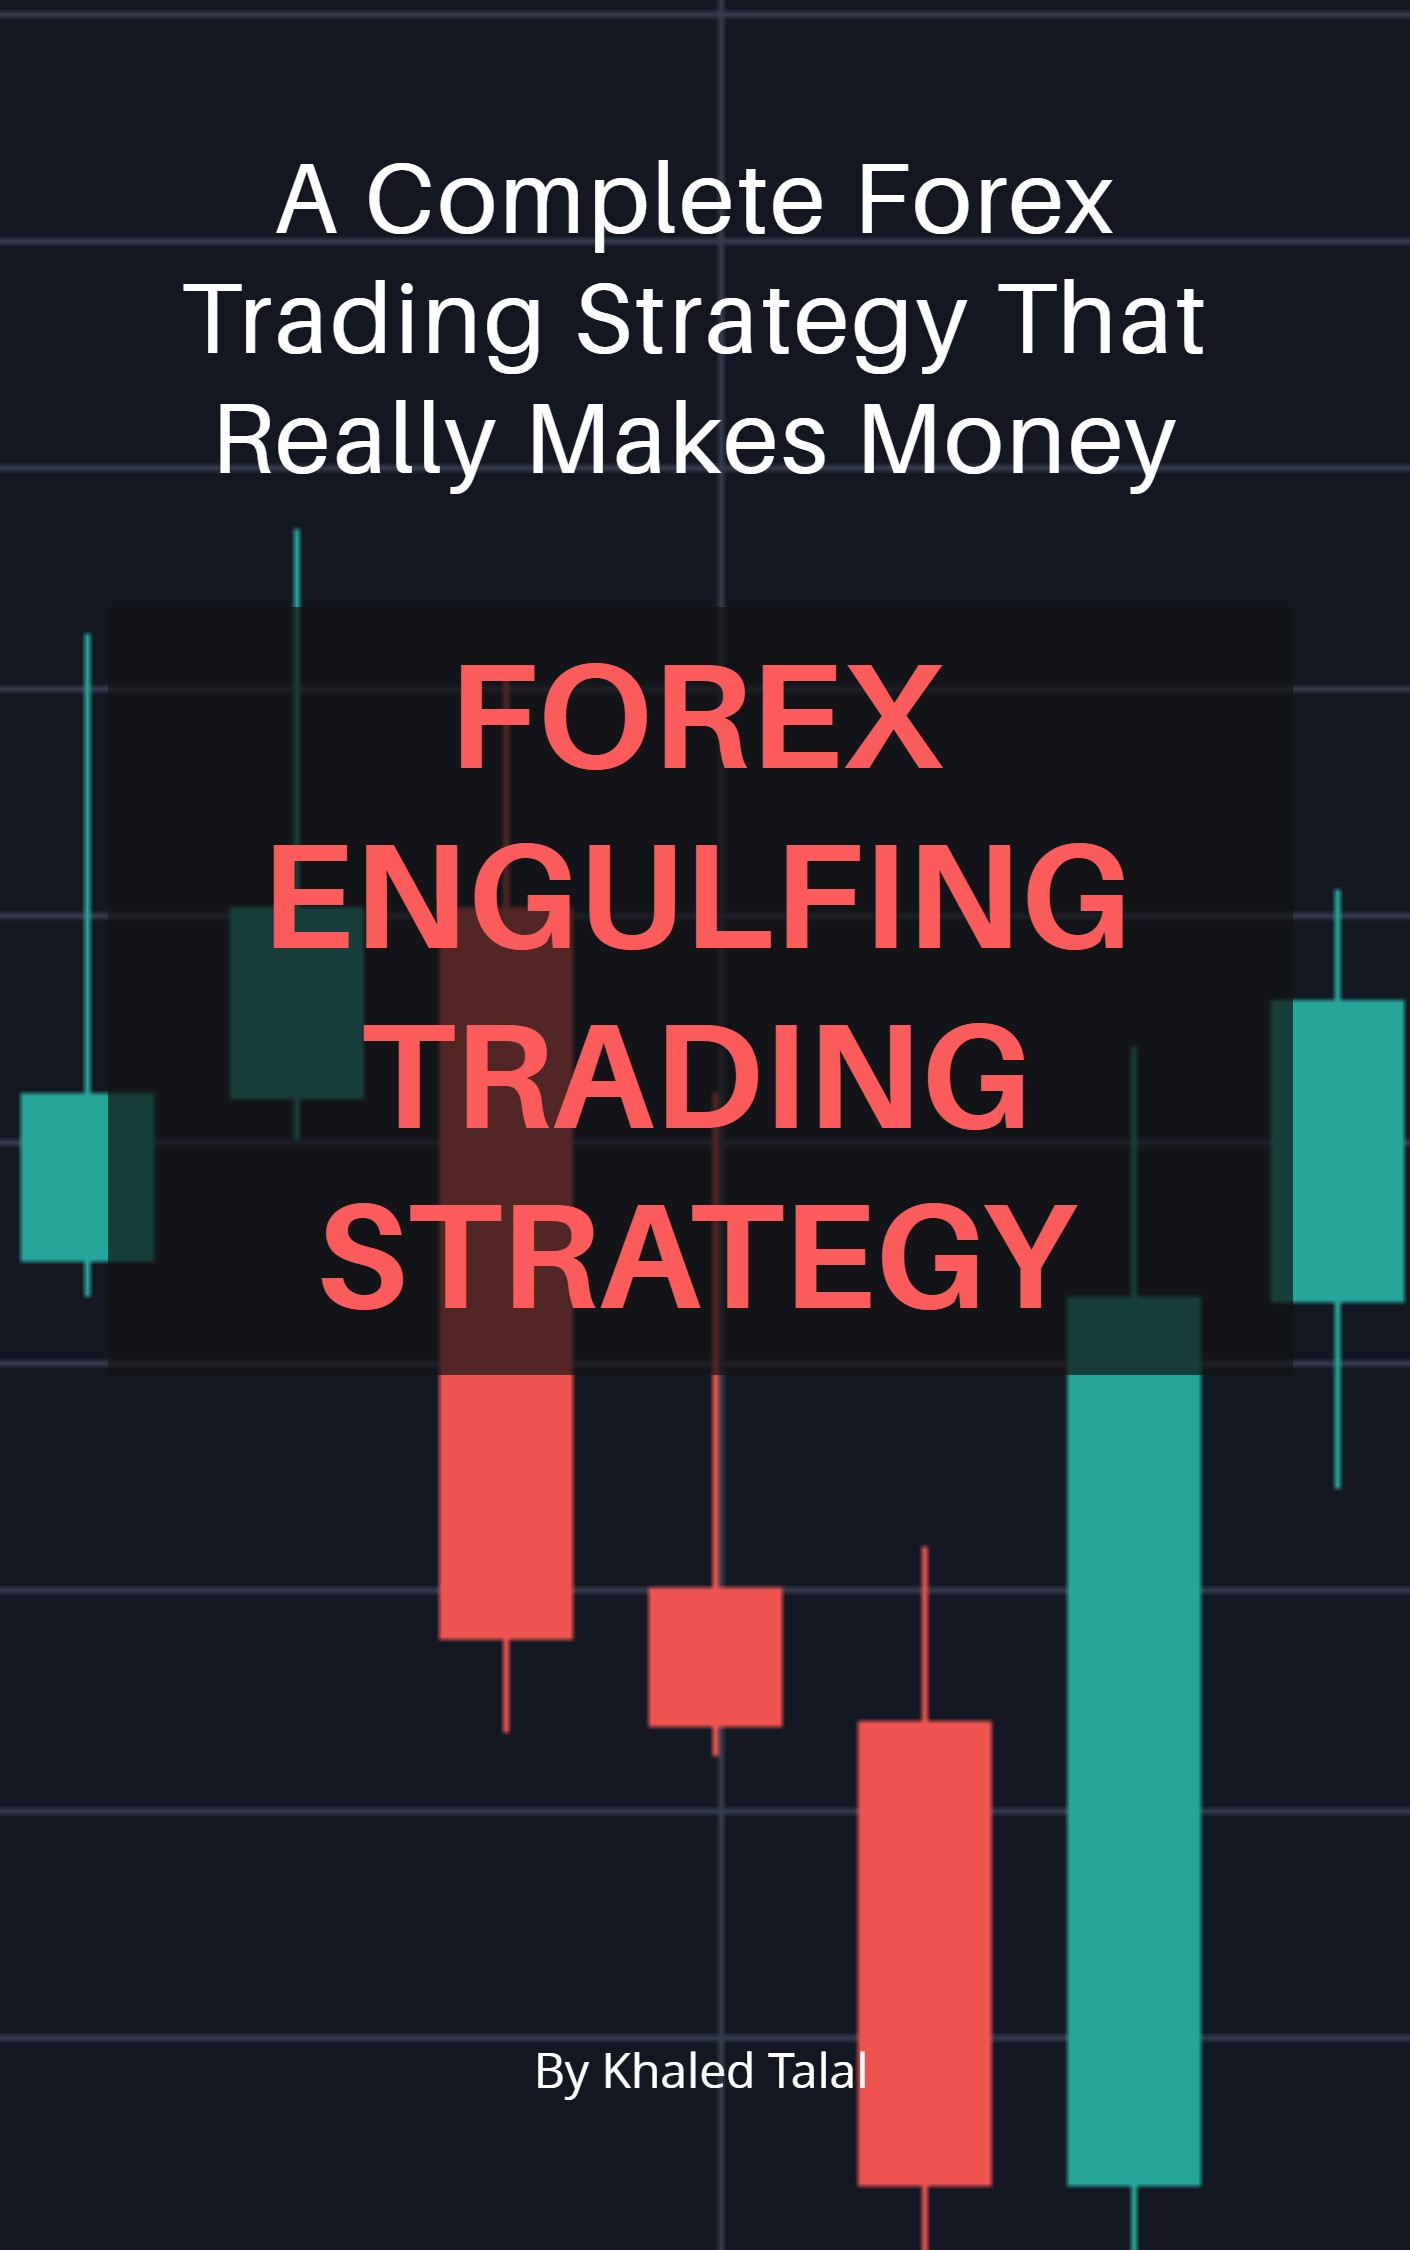 Forex Engulfing Trading Strategy A Complete Forex Trading Strategy That Really Makes Money An Ebook By Khaled Talal - 